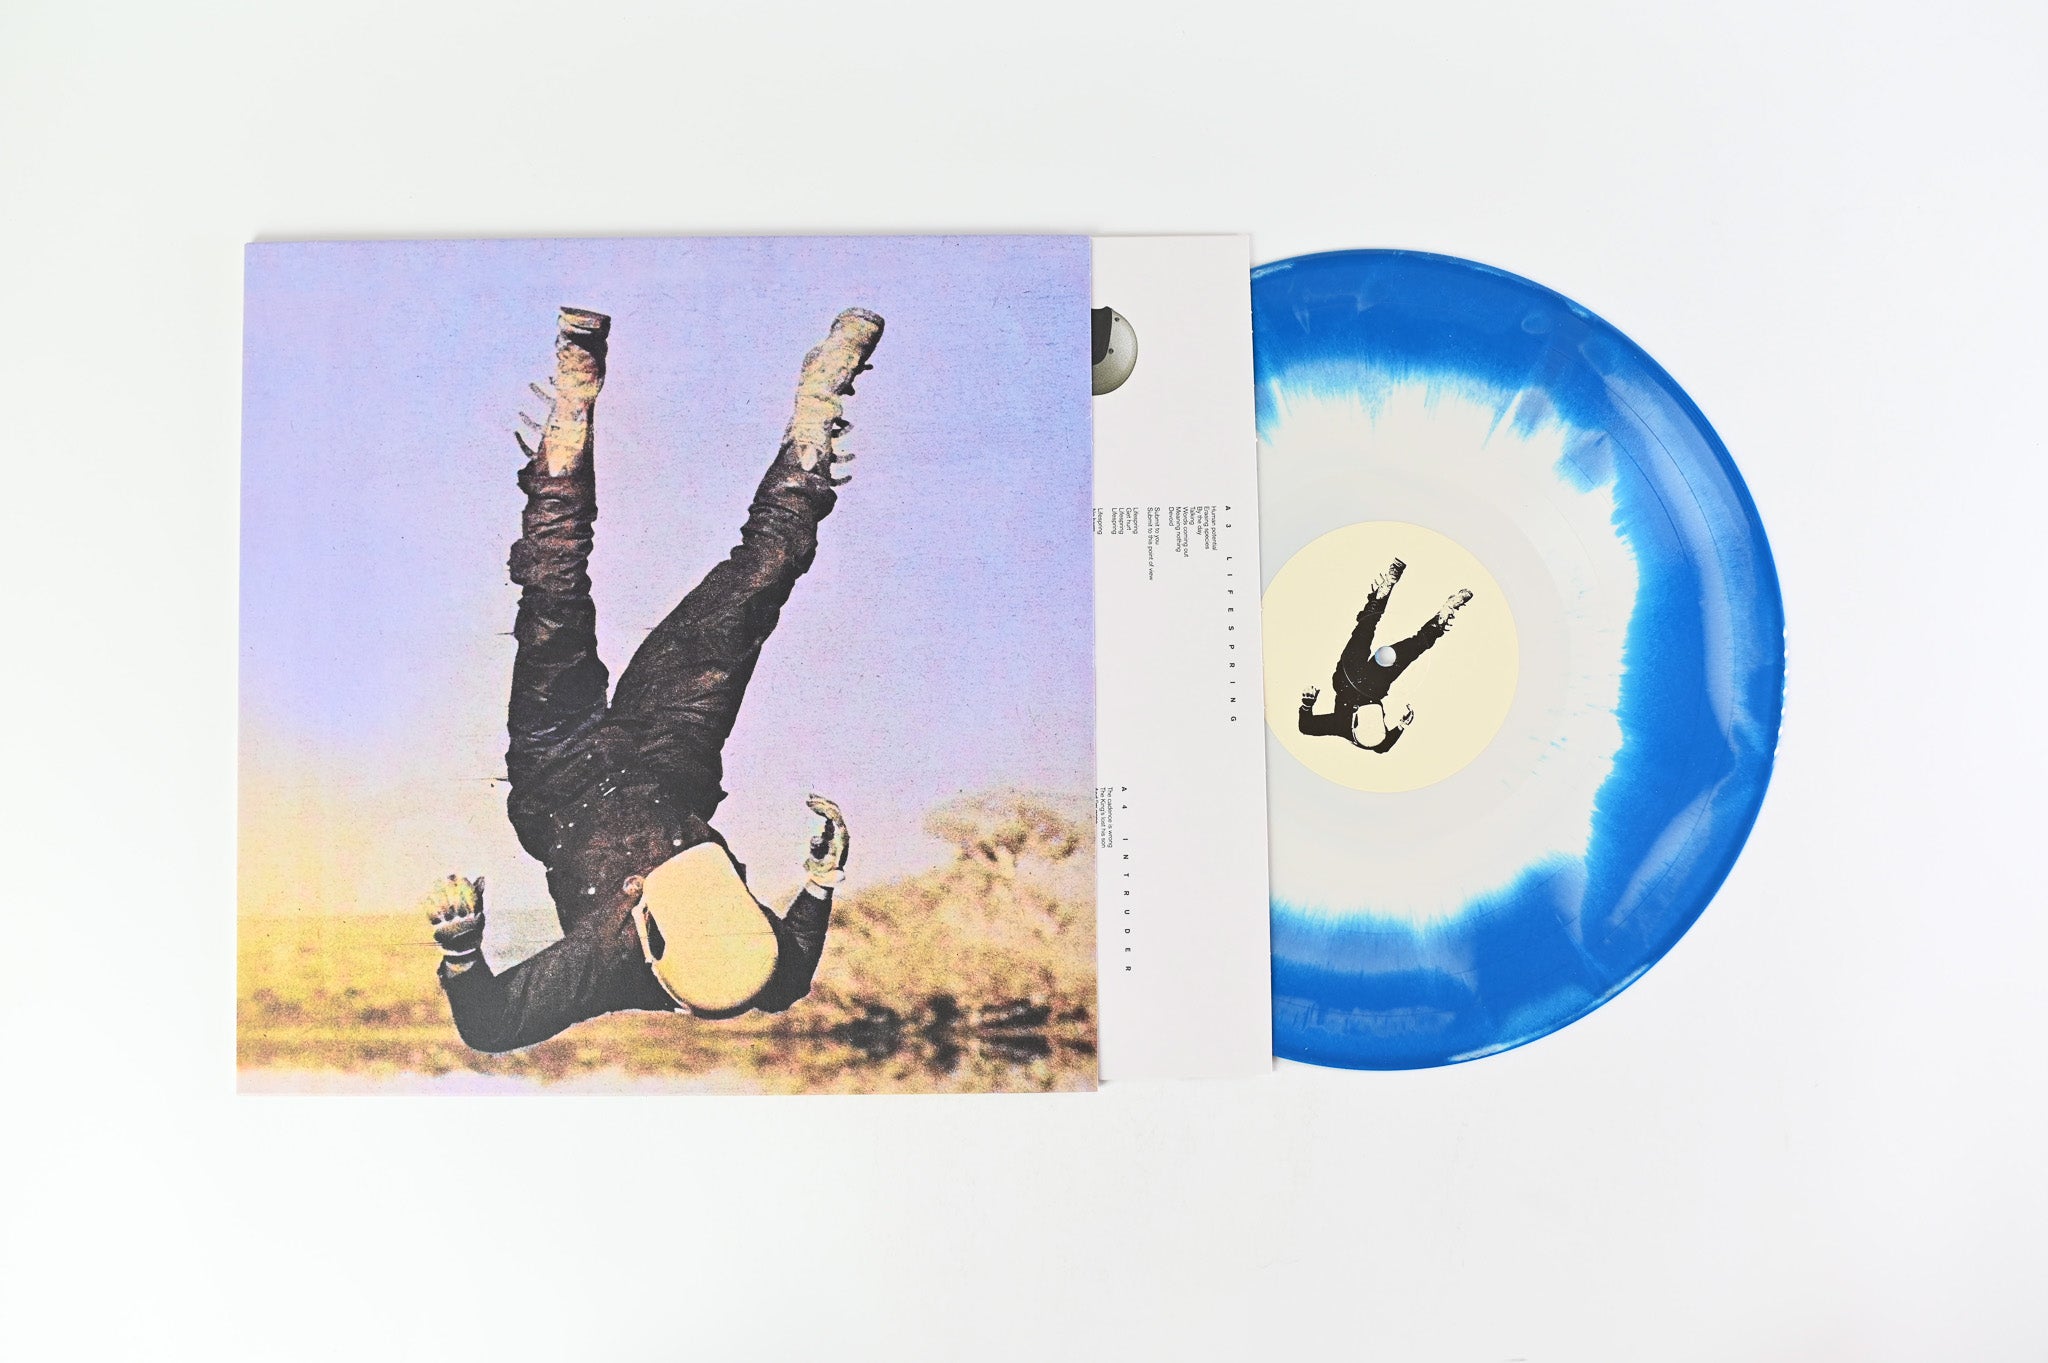 Death Bells - Between Here & Everywhere on Dais Records - Blue/Bone Smash Colored Vinyl